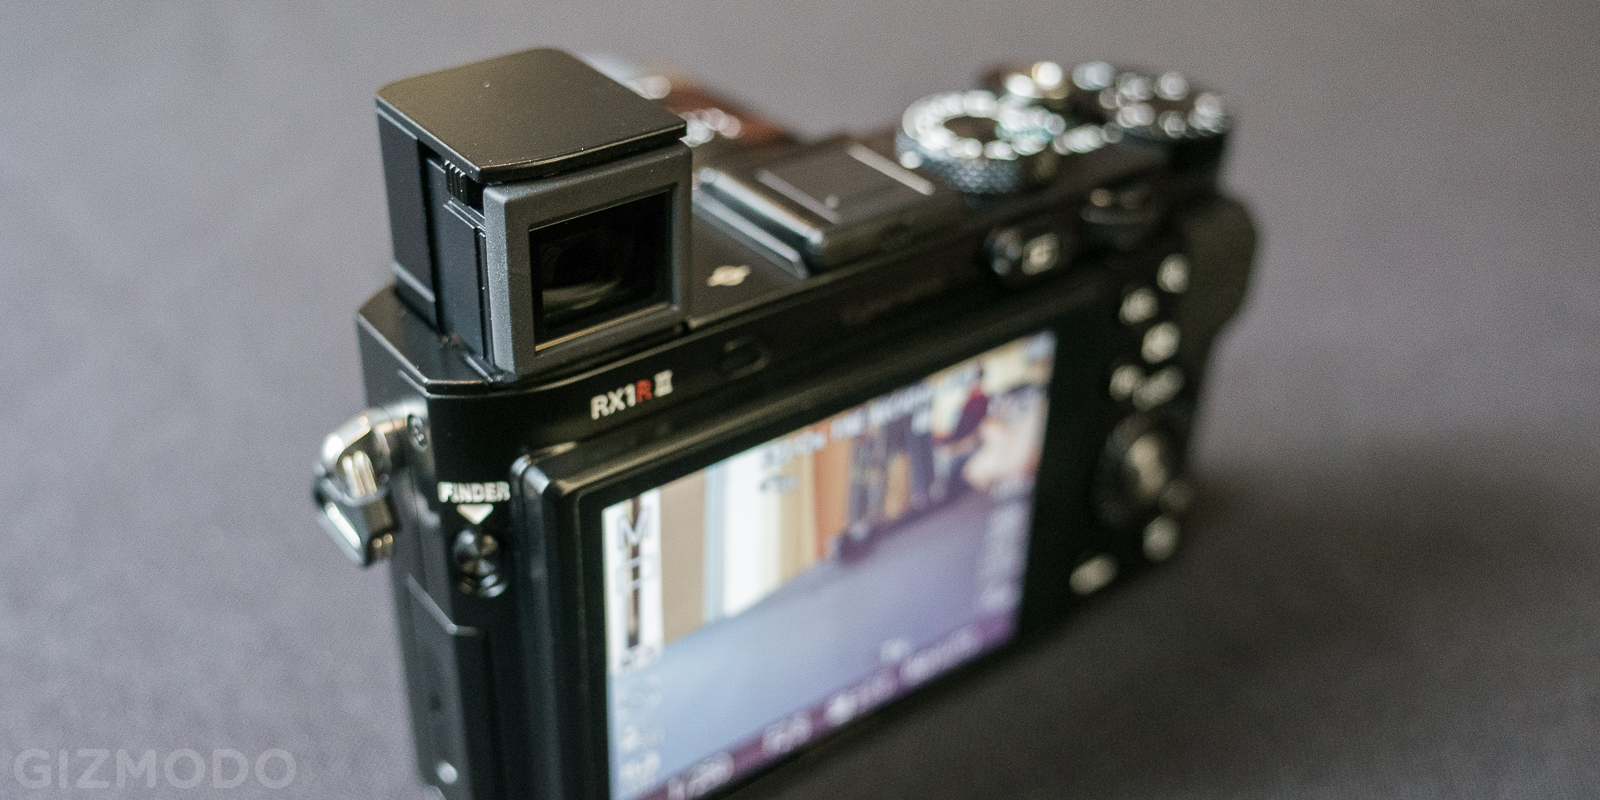 Sonys RX1r II: Is That 42 Megapixels In Your Pocket, Or Are You Just Happy To See Me?